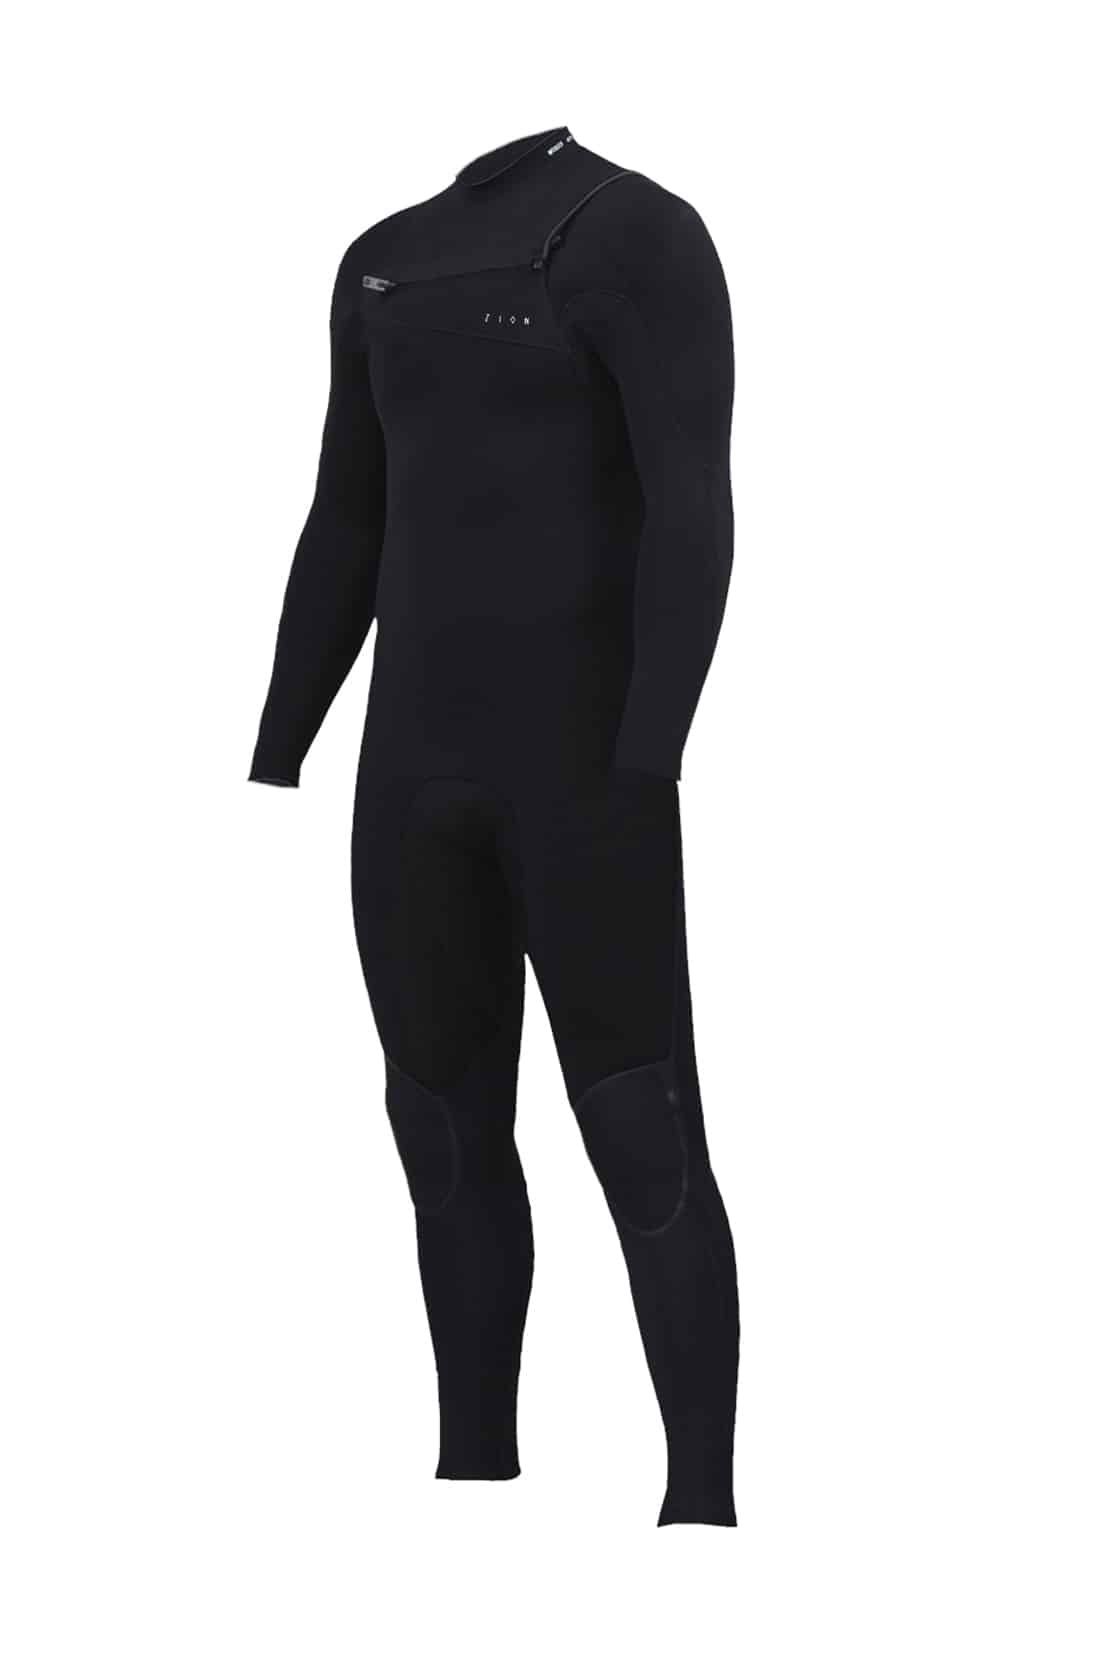 WESLEY 4/3 Steamer BLACK – Zion Wetsuits